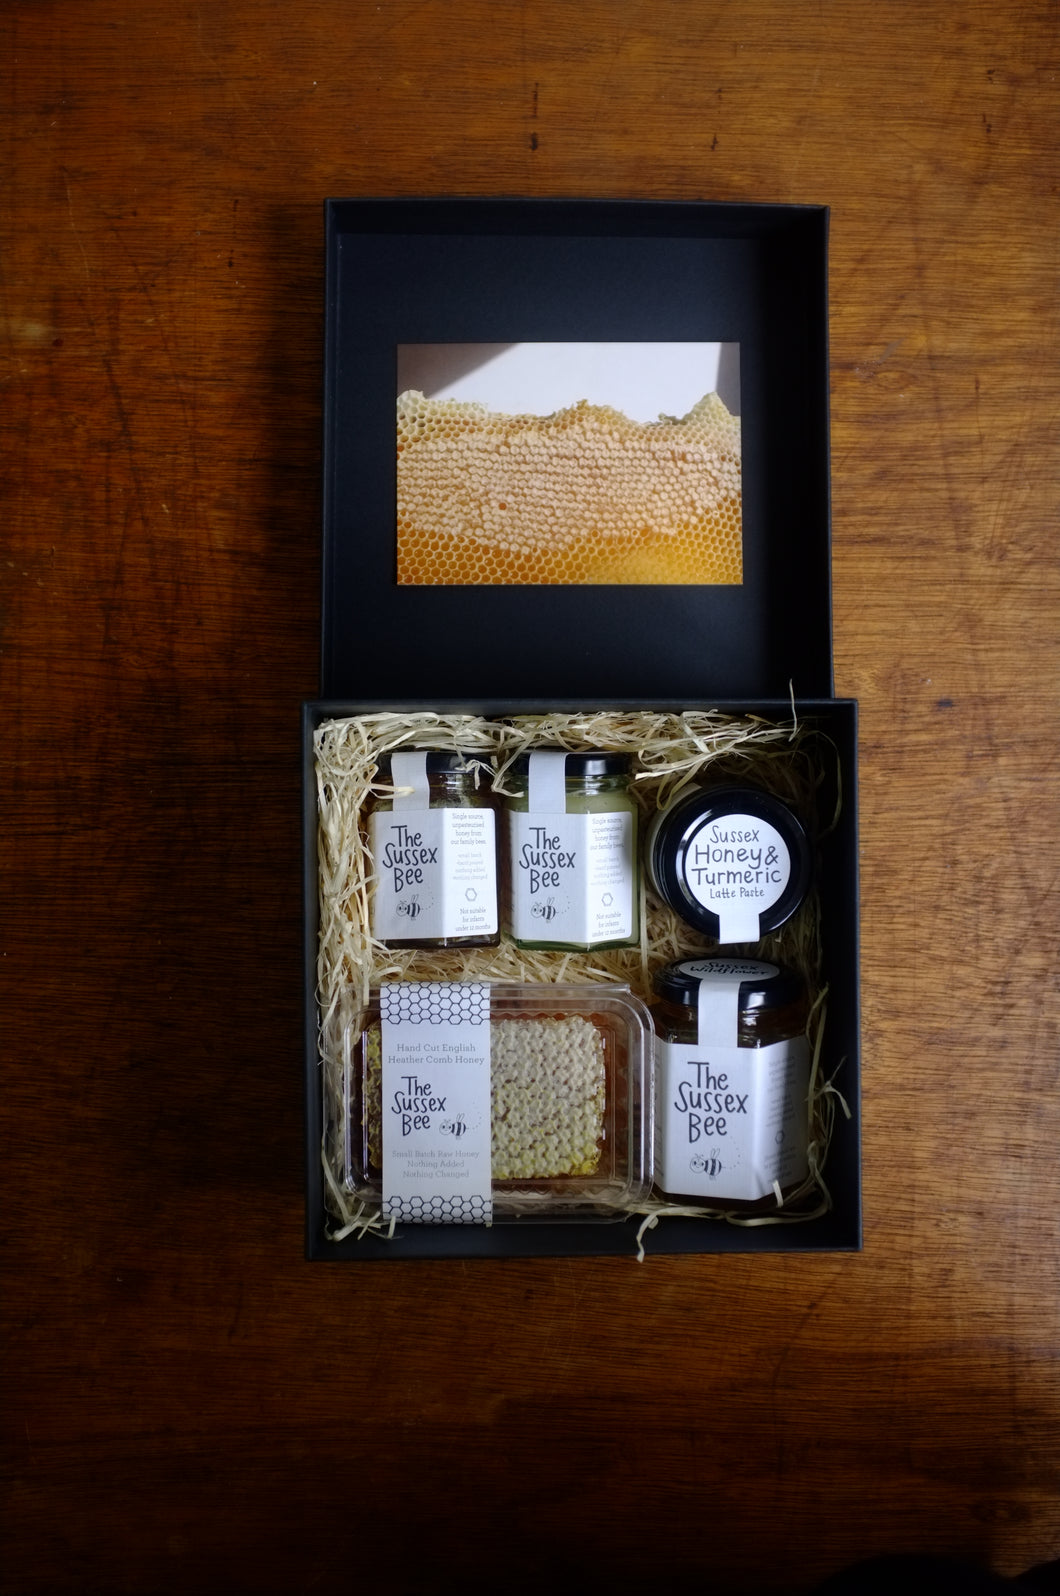 Honey Lover Tasting Box - With Heather Comb